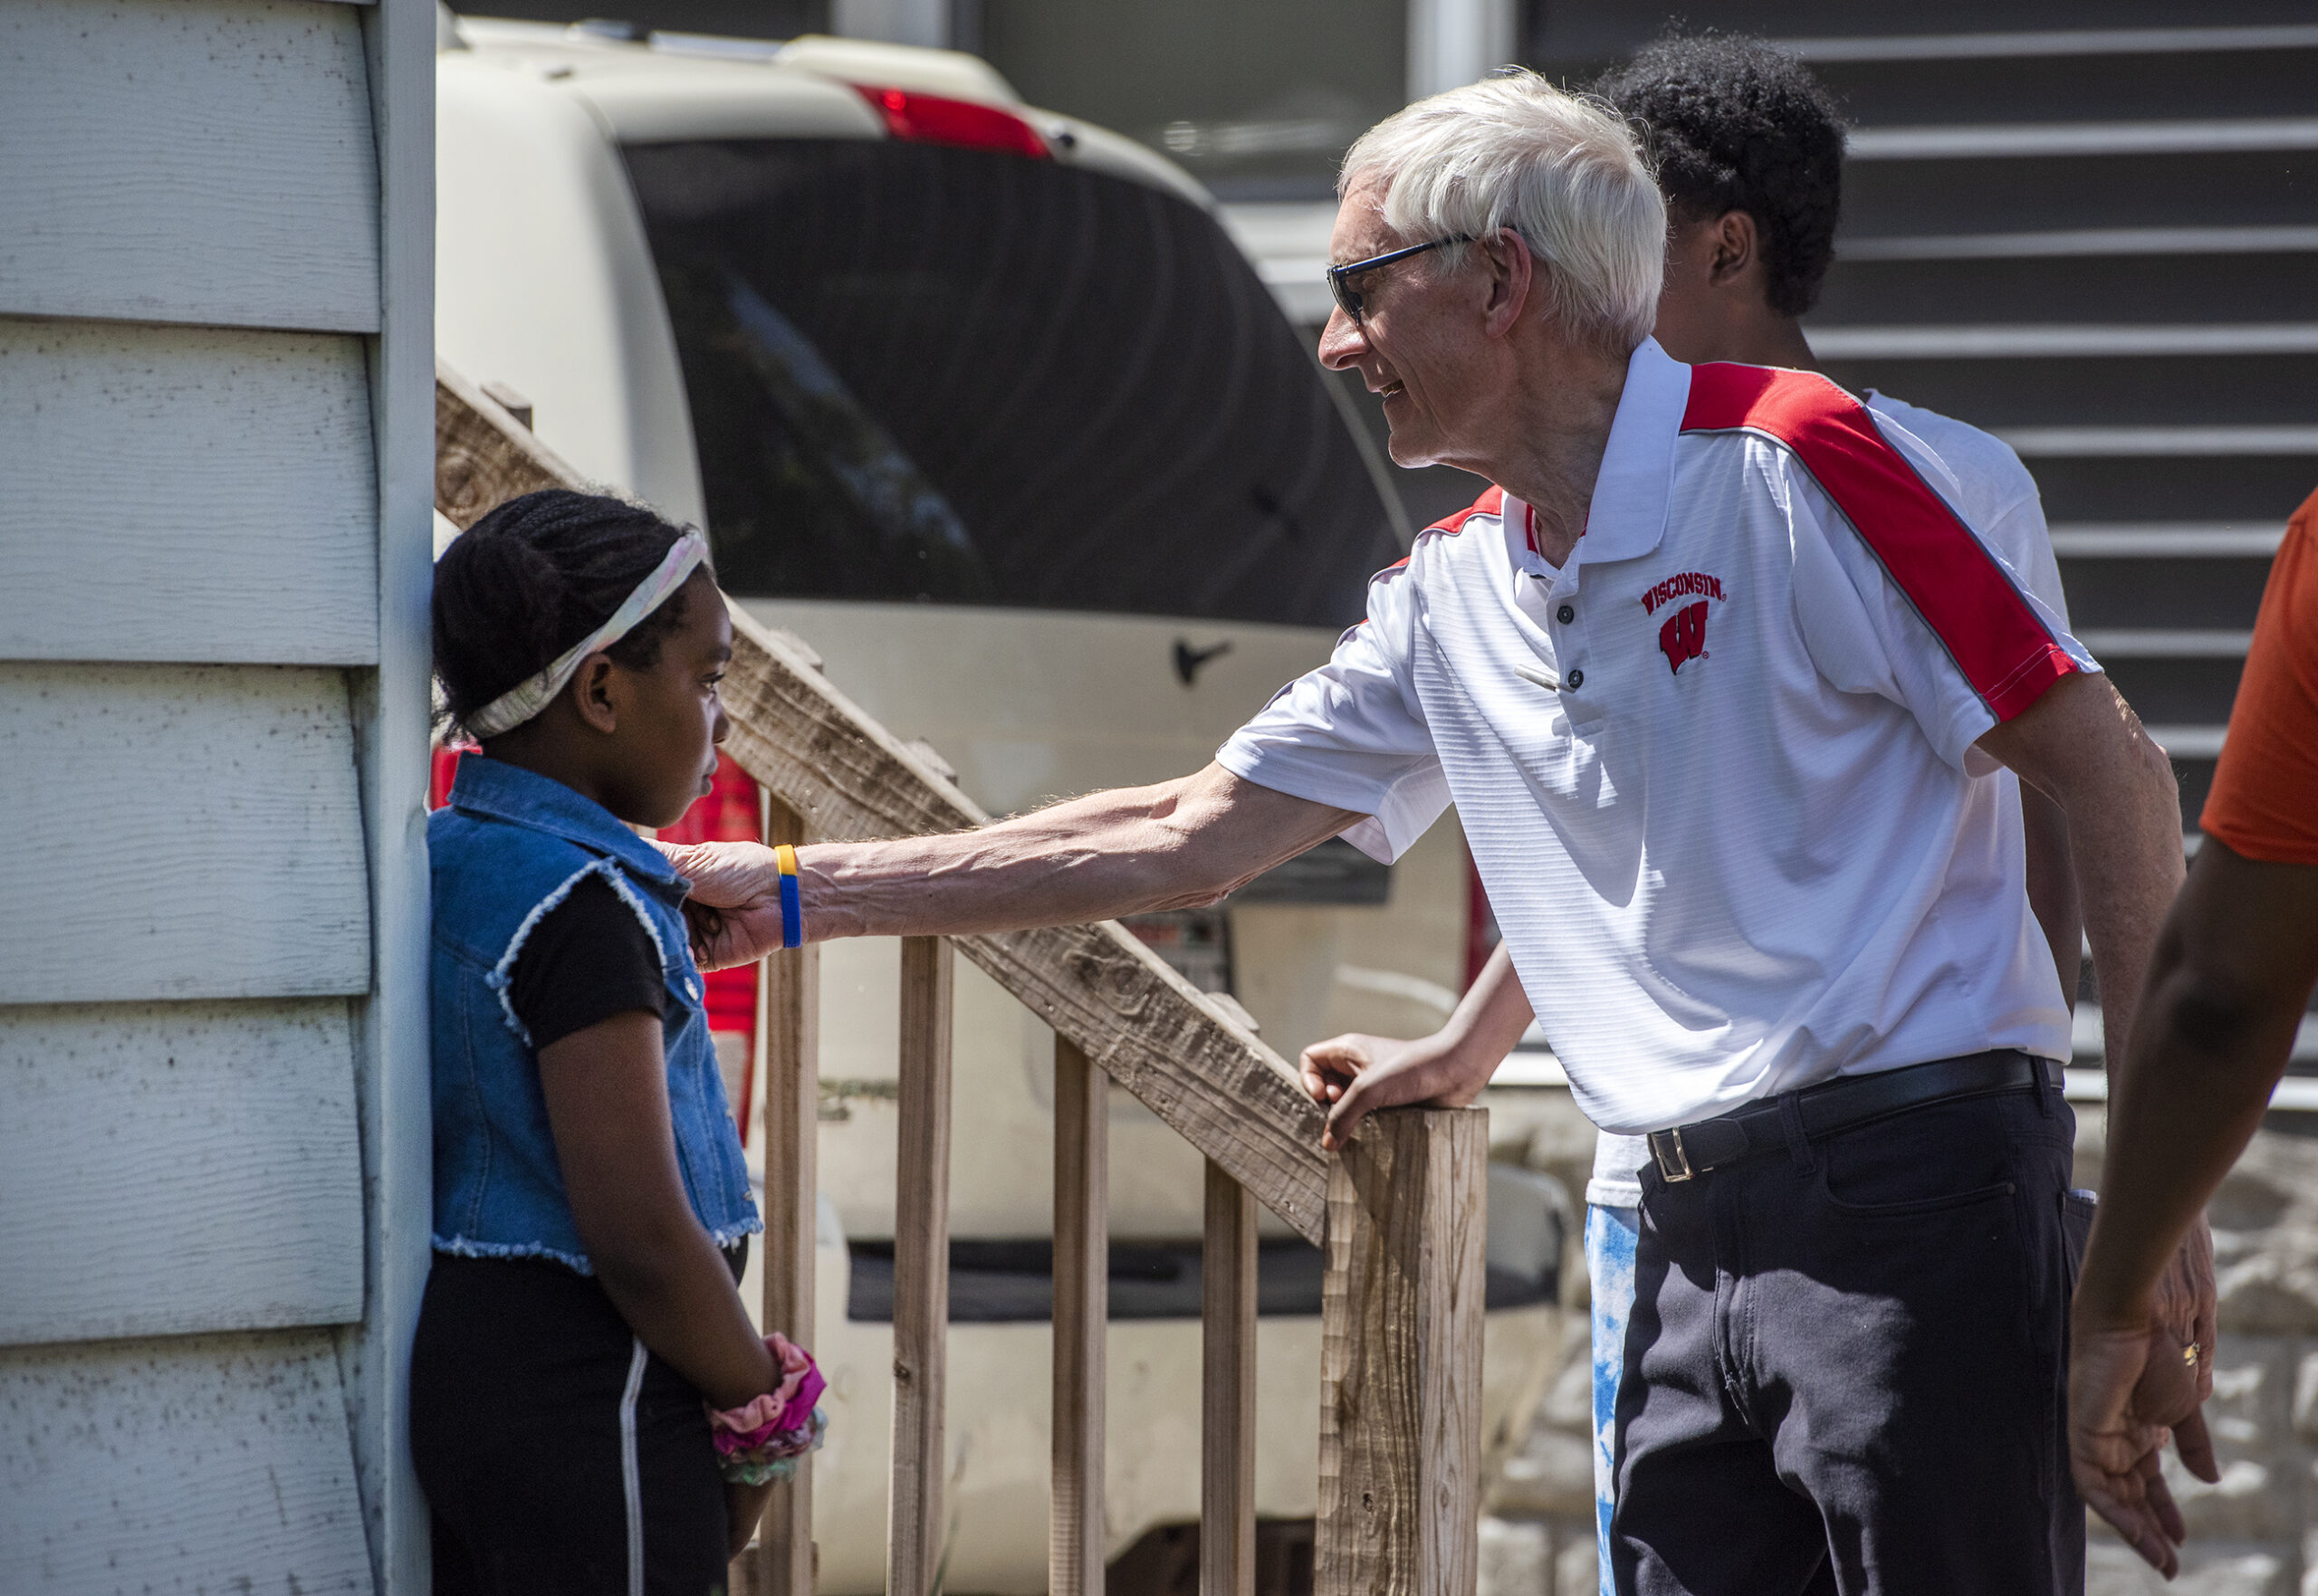 Gov. Tony Evers greets a child during a walk outside.